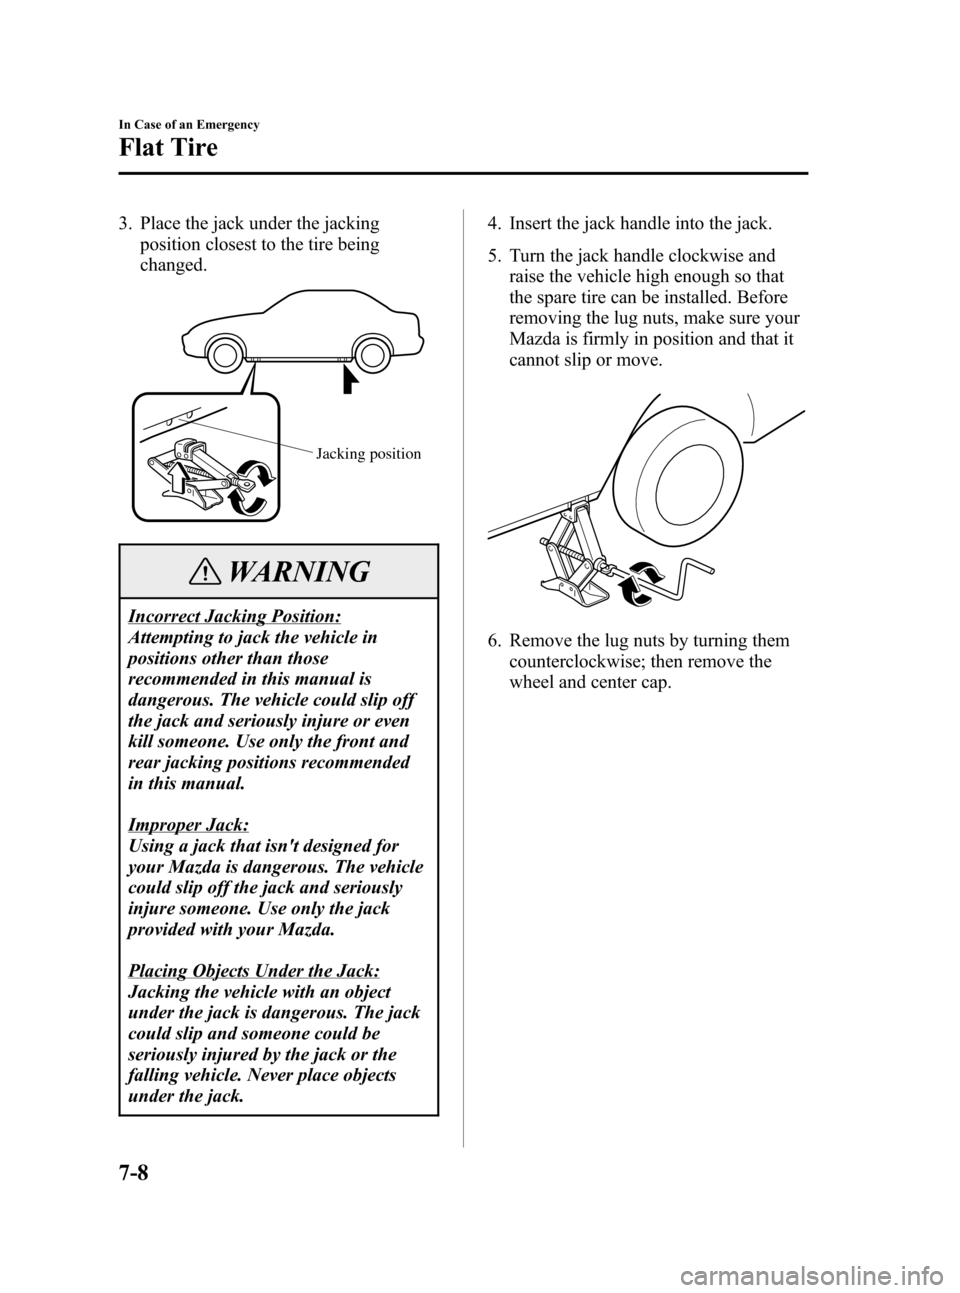 MAZDA MODEL 3 HATCHBACK 2006  Owners Manual (in English) Black plate (234,1)
3. Place the jack under the jacking
position closest to the tire being
changed.
Jacking position
WARNING
Incorrect Jacking Position:
Attempting to jack the vehicle in
positions oth